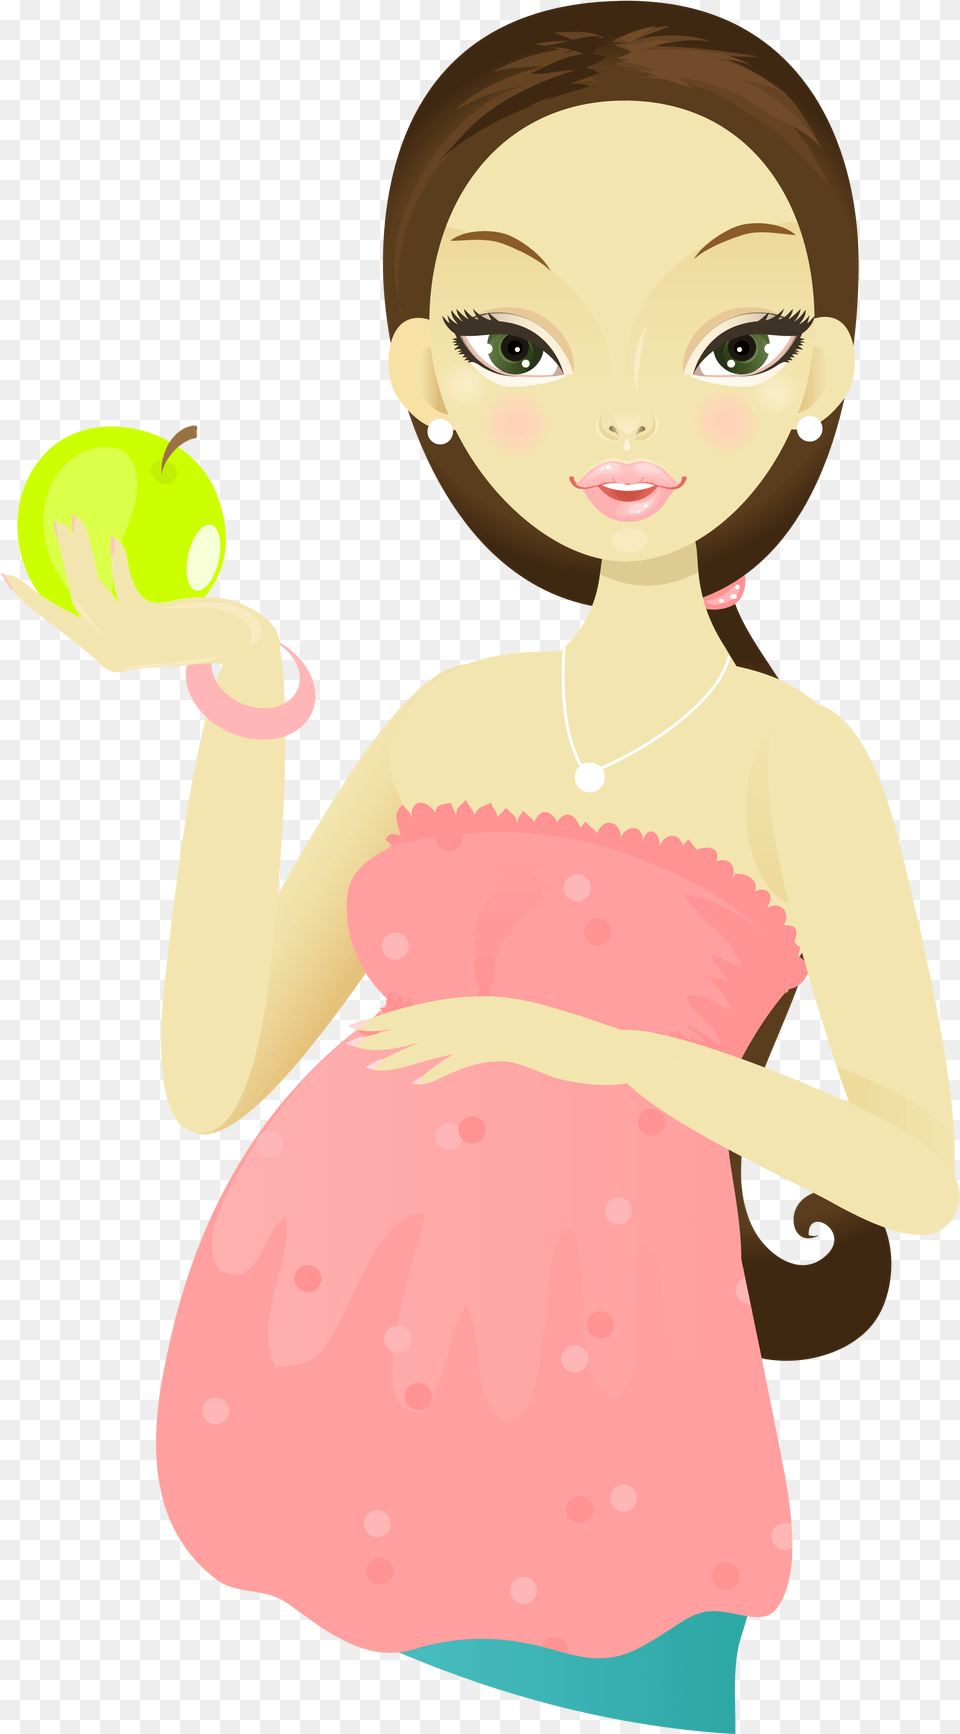 Download Cartoon Woman Mother Holding Apple Transprent Transparent Cartoon Pregnant Woman, Person, Produce, Food, Fruit Png Image